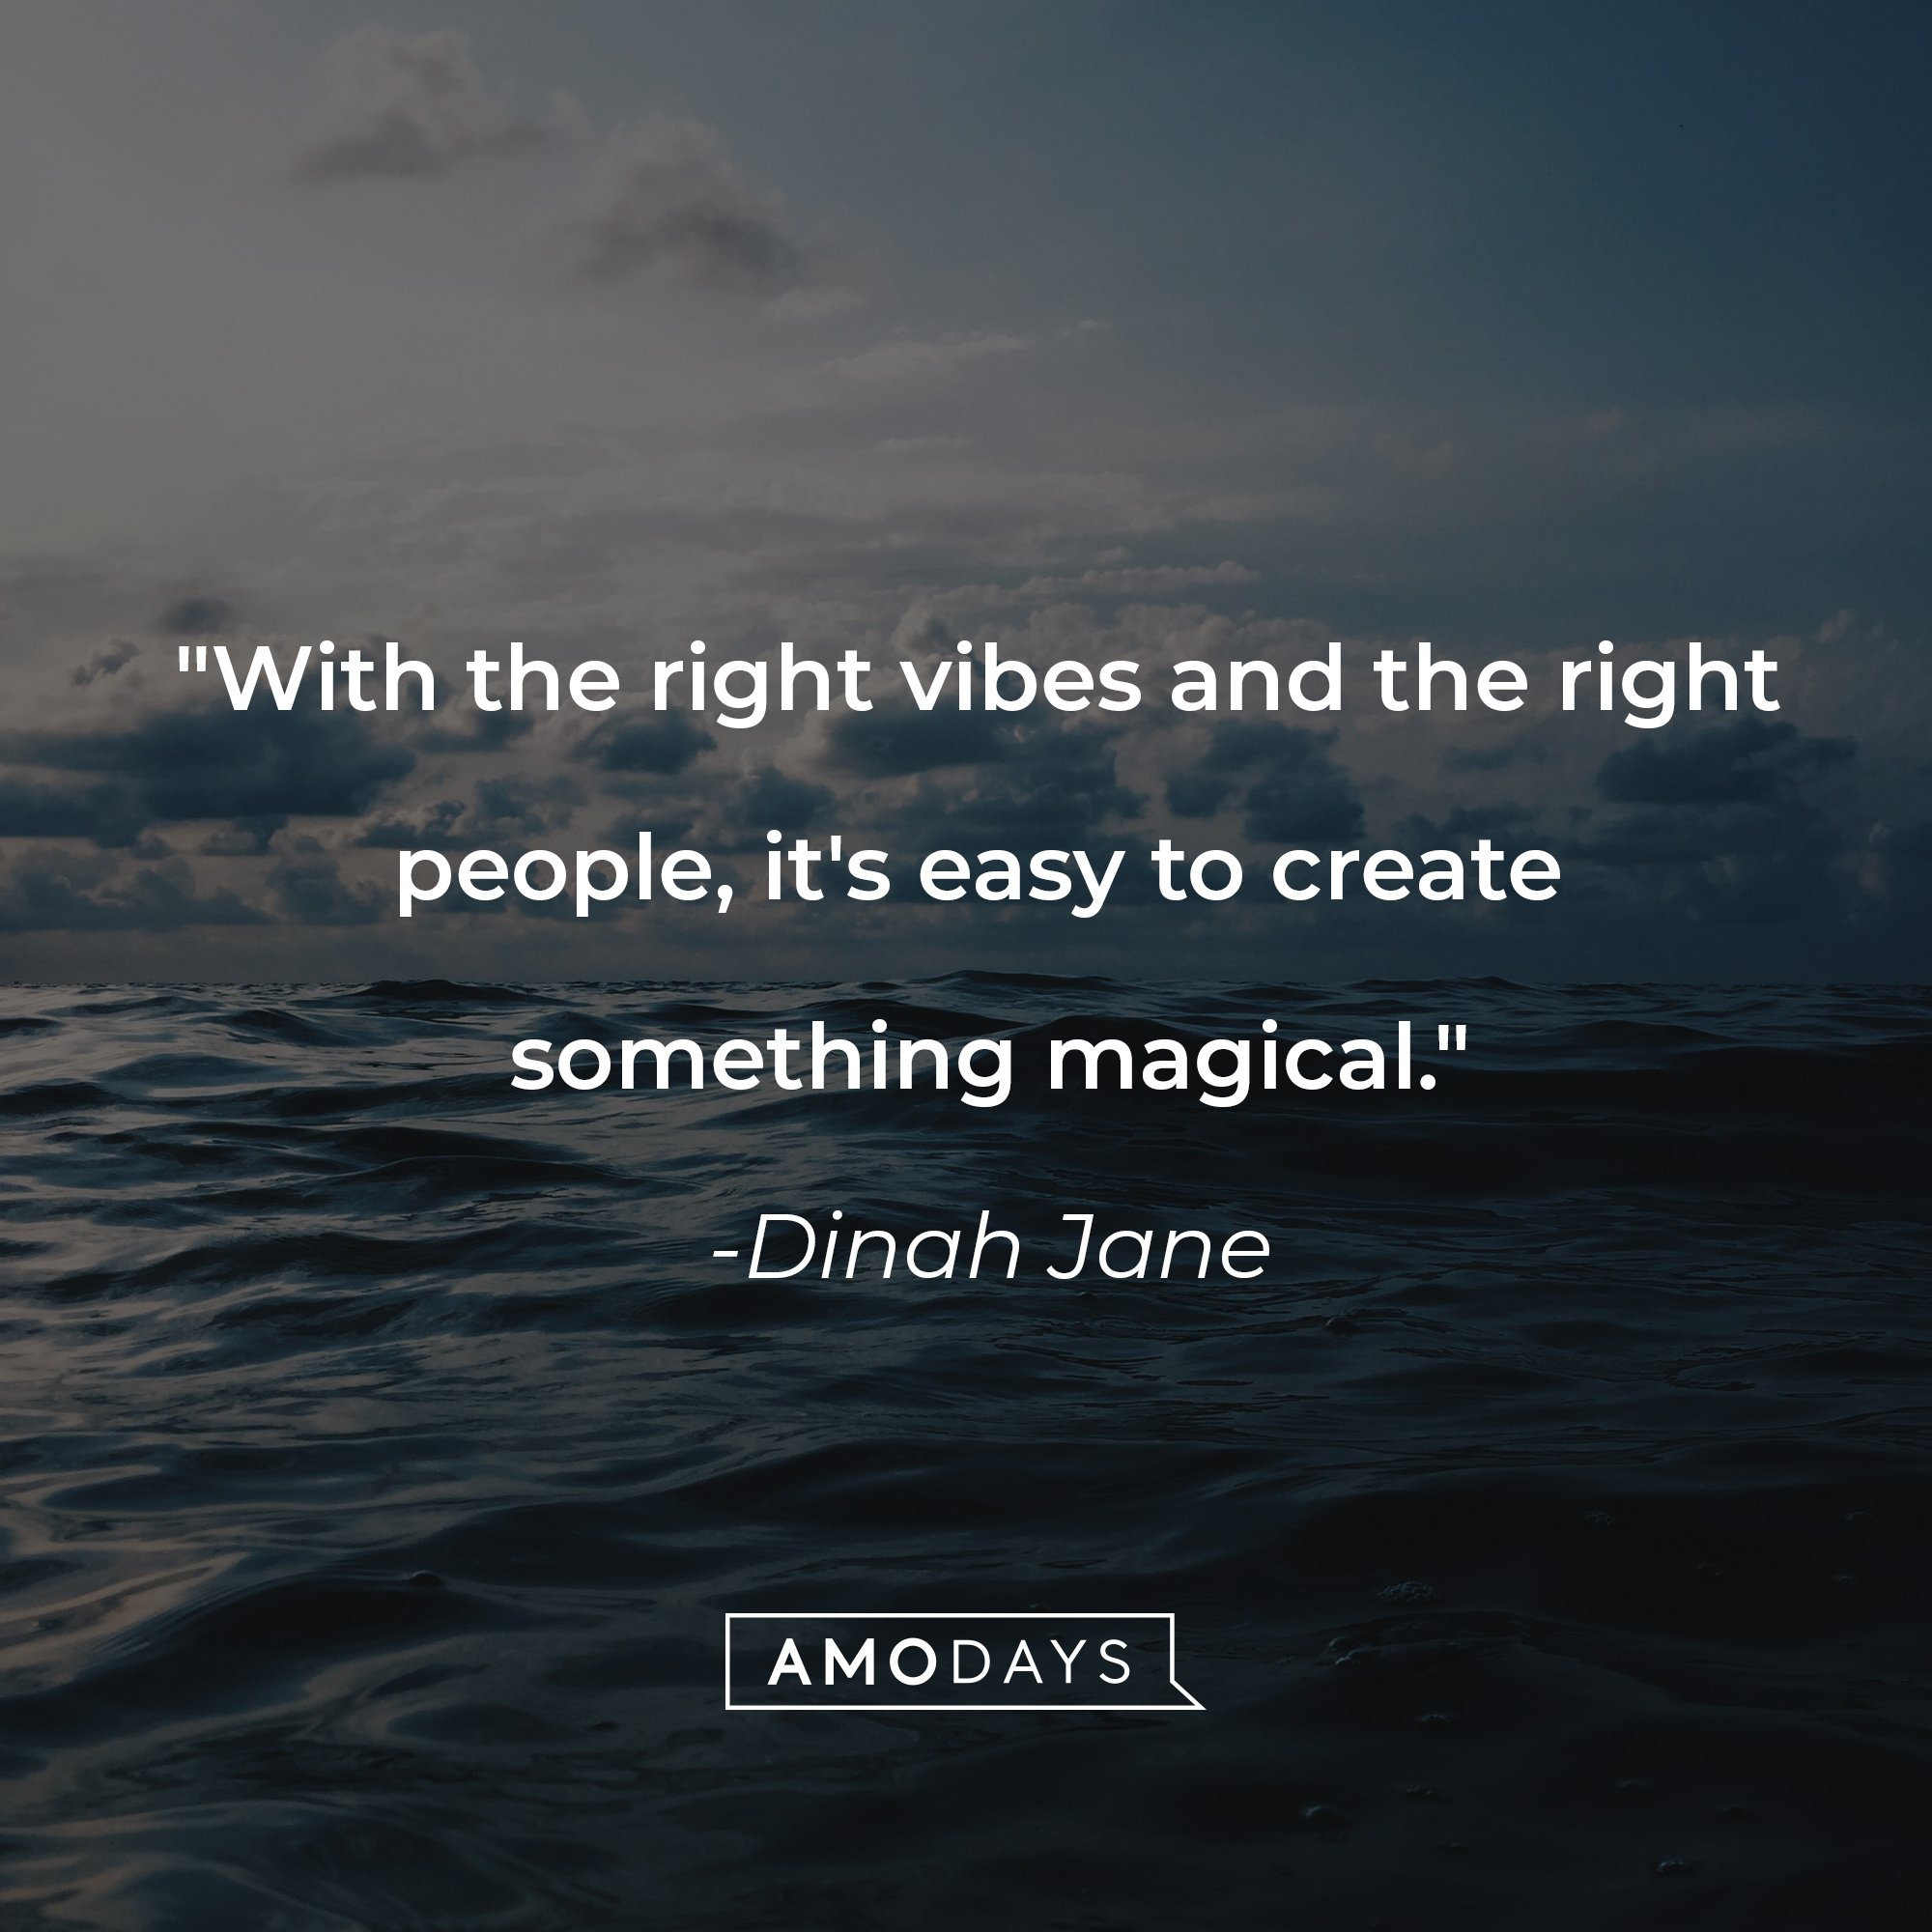 Dinah Jane's quote: "With the right vibes and the right people, it's easy to create something magical." | Image: AmoDays